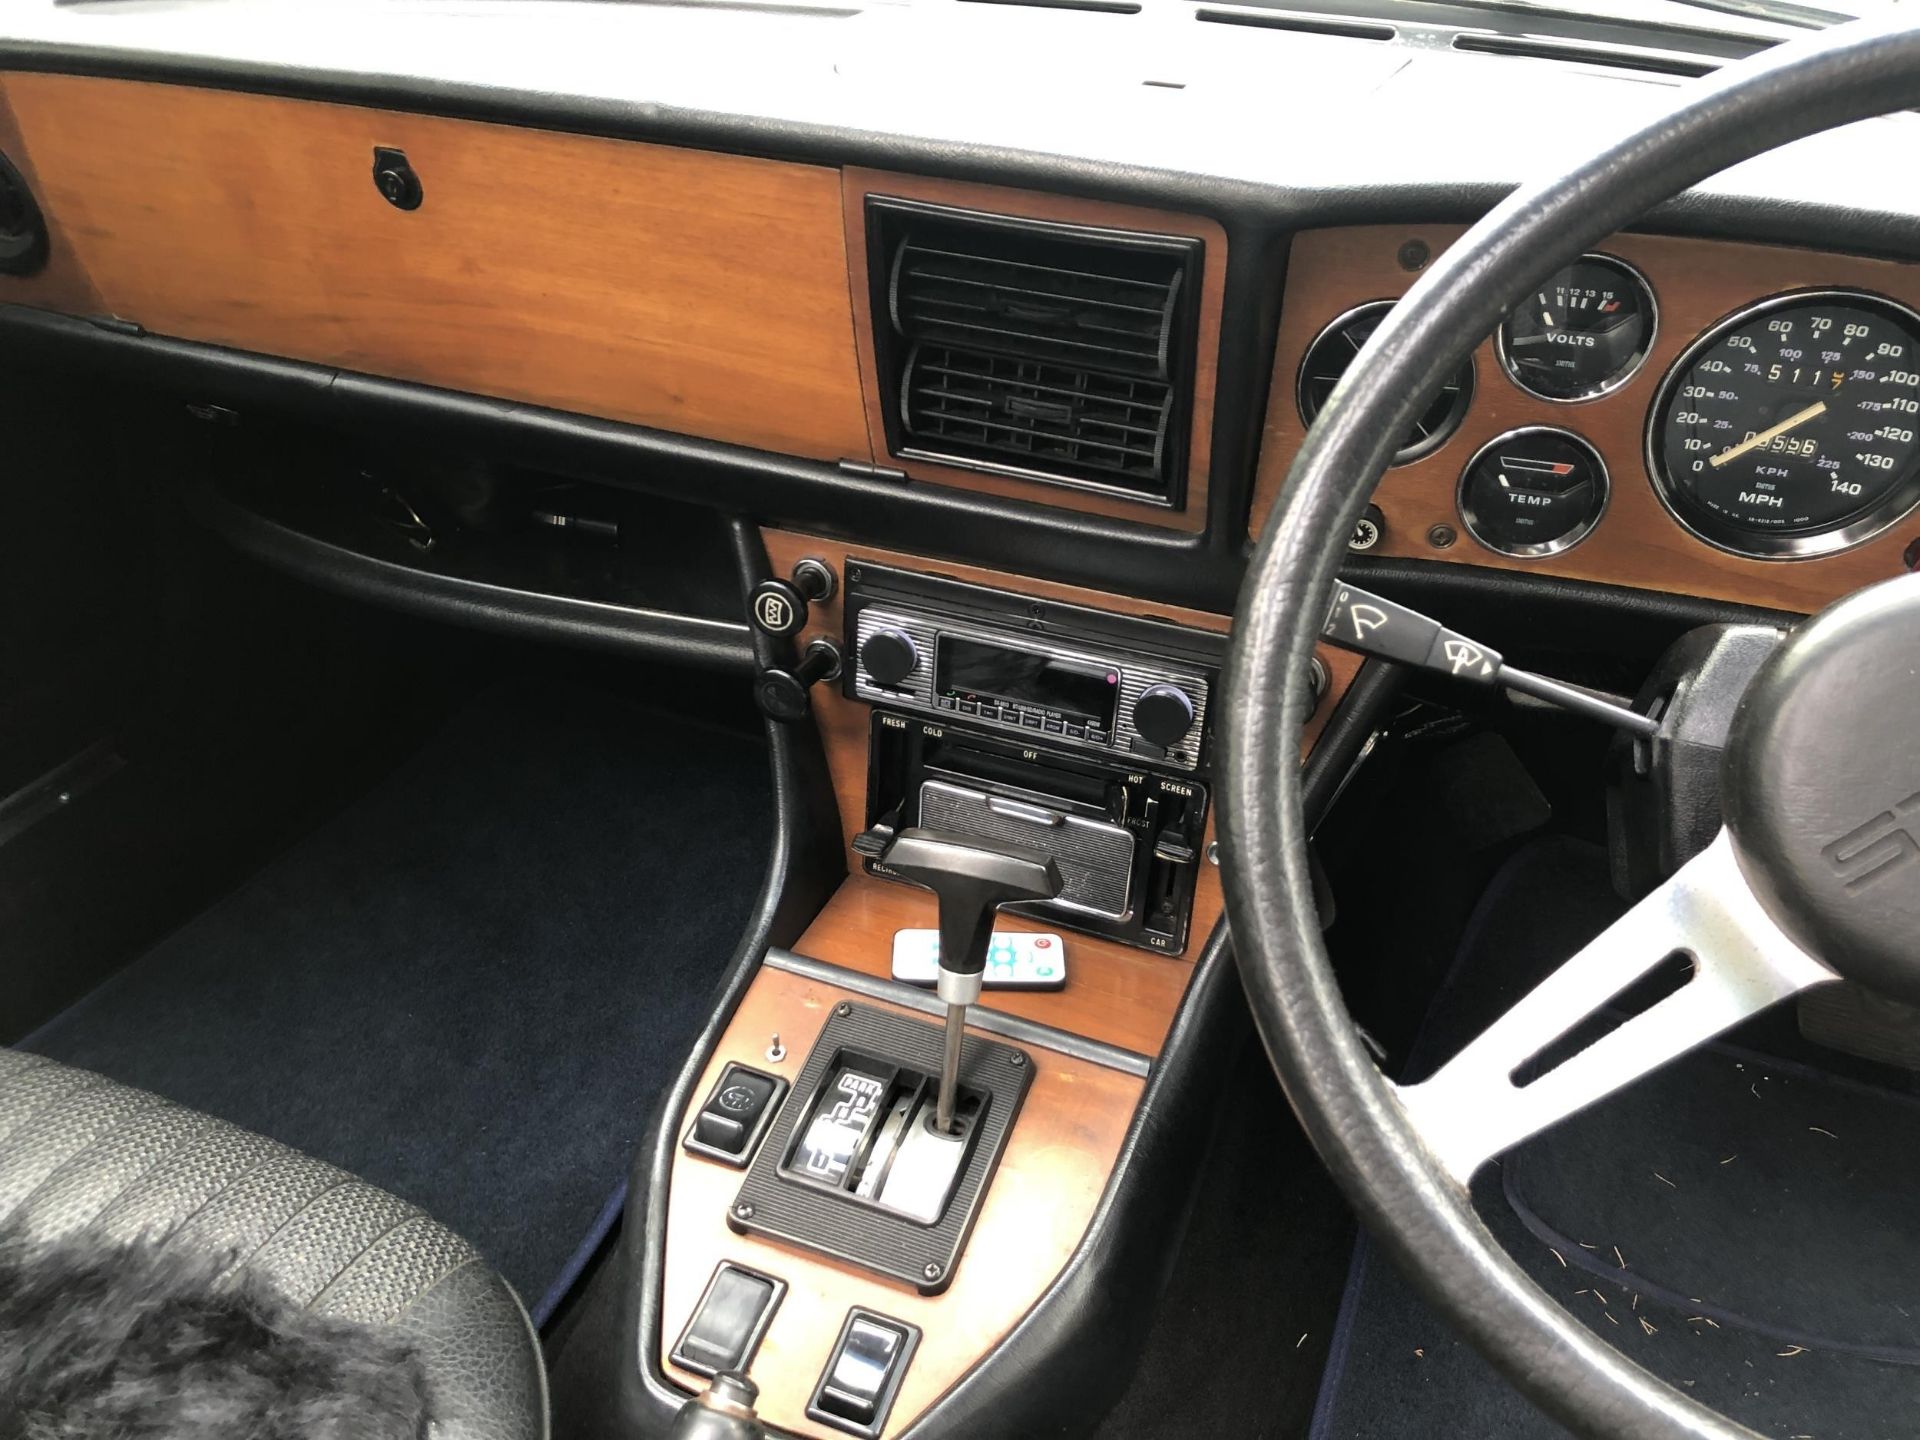 1975 Triumph Stag Registration number KNK 148N French blue with a black interior Automatic Gearbox - Image 9 of 57